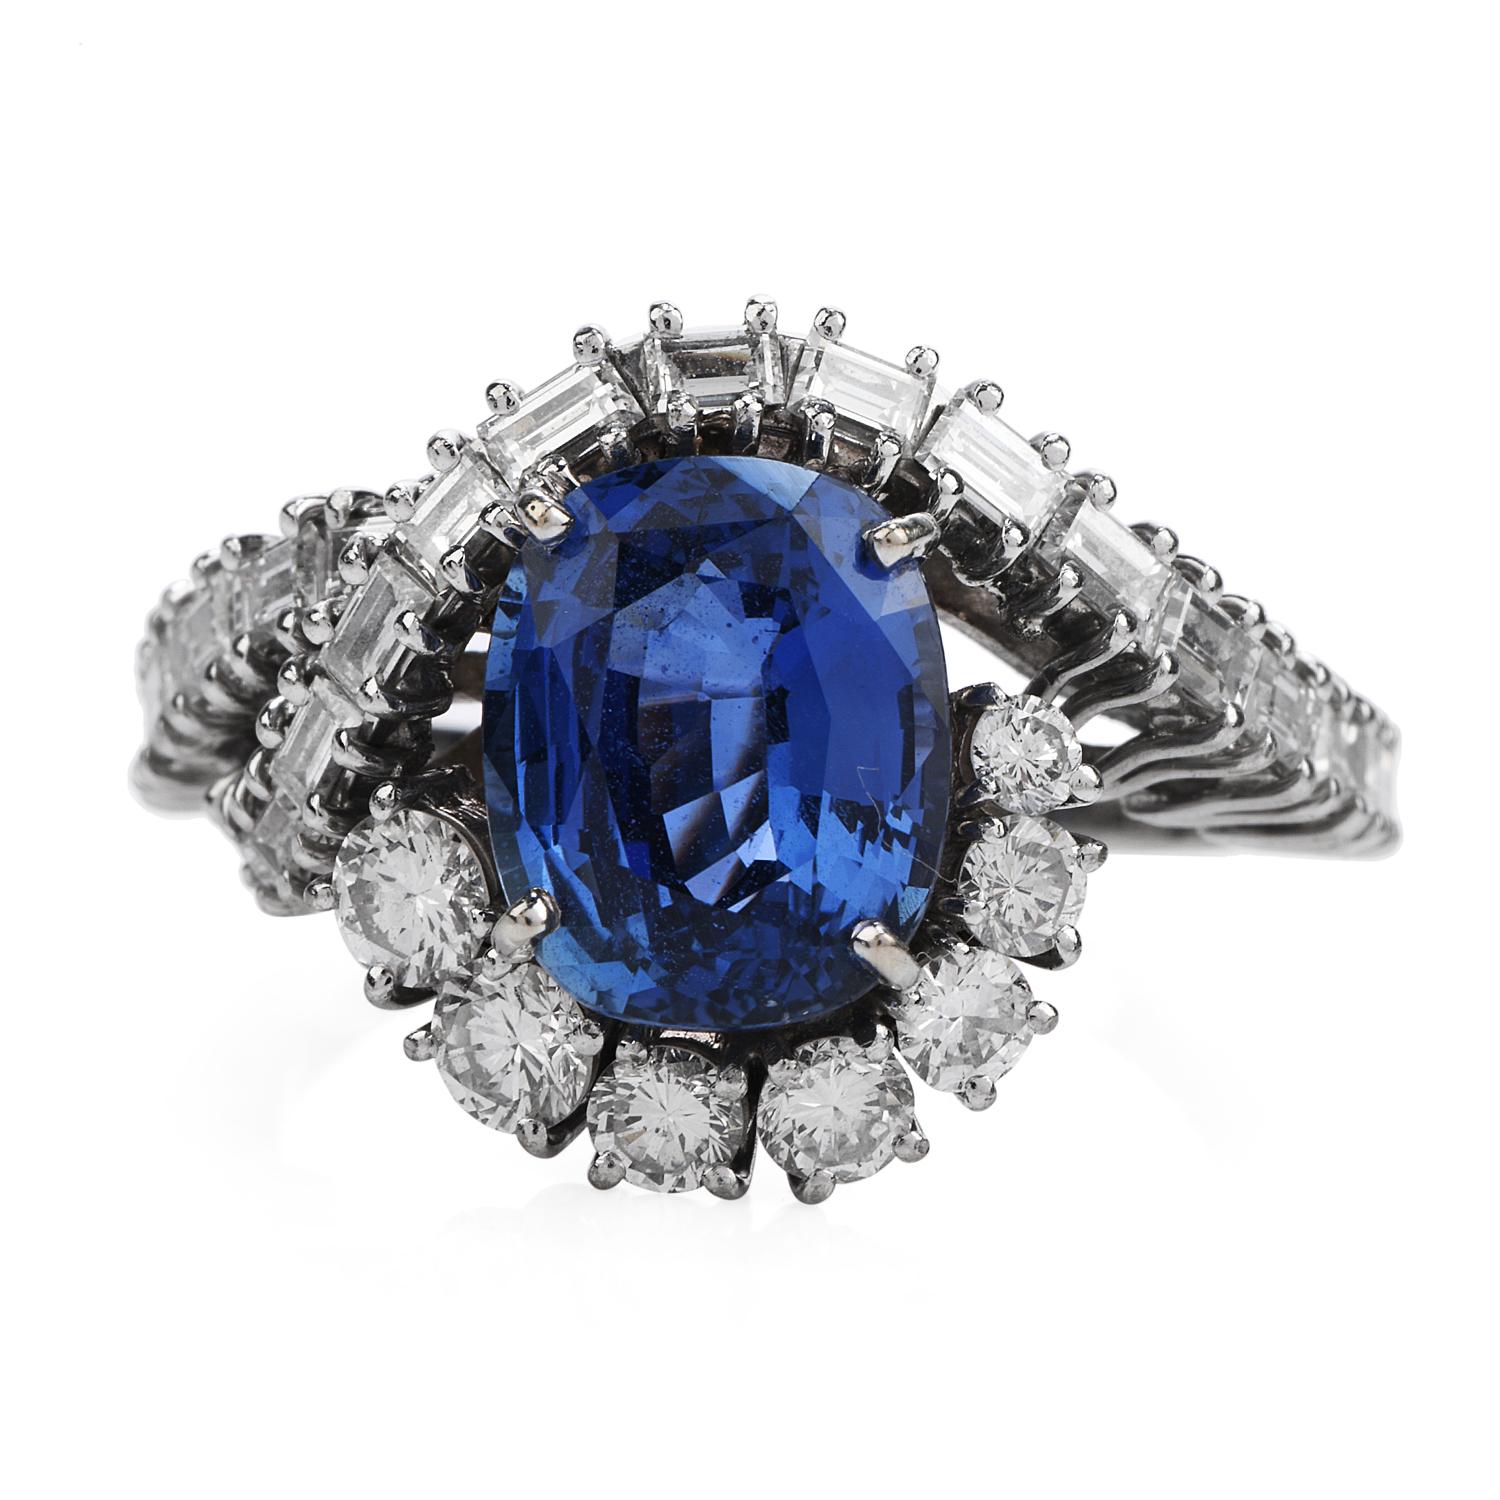 A  Bypass Ring with a Retro Inspired look, that is

is perfect for showing love for the Vintage style!

This Cocktail Engagement Ring is crafted in solid 18K White Gold.

Featuring in the center one Cushion Cut, Genuine Natural Ceylon Blue Sapphire